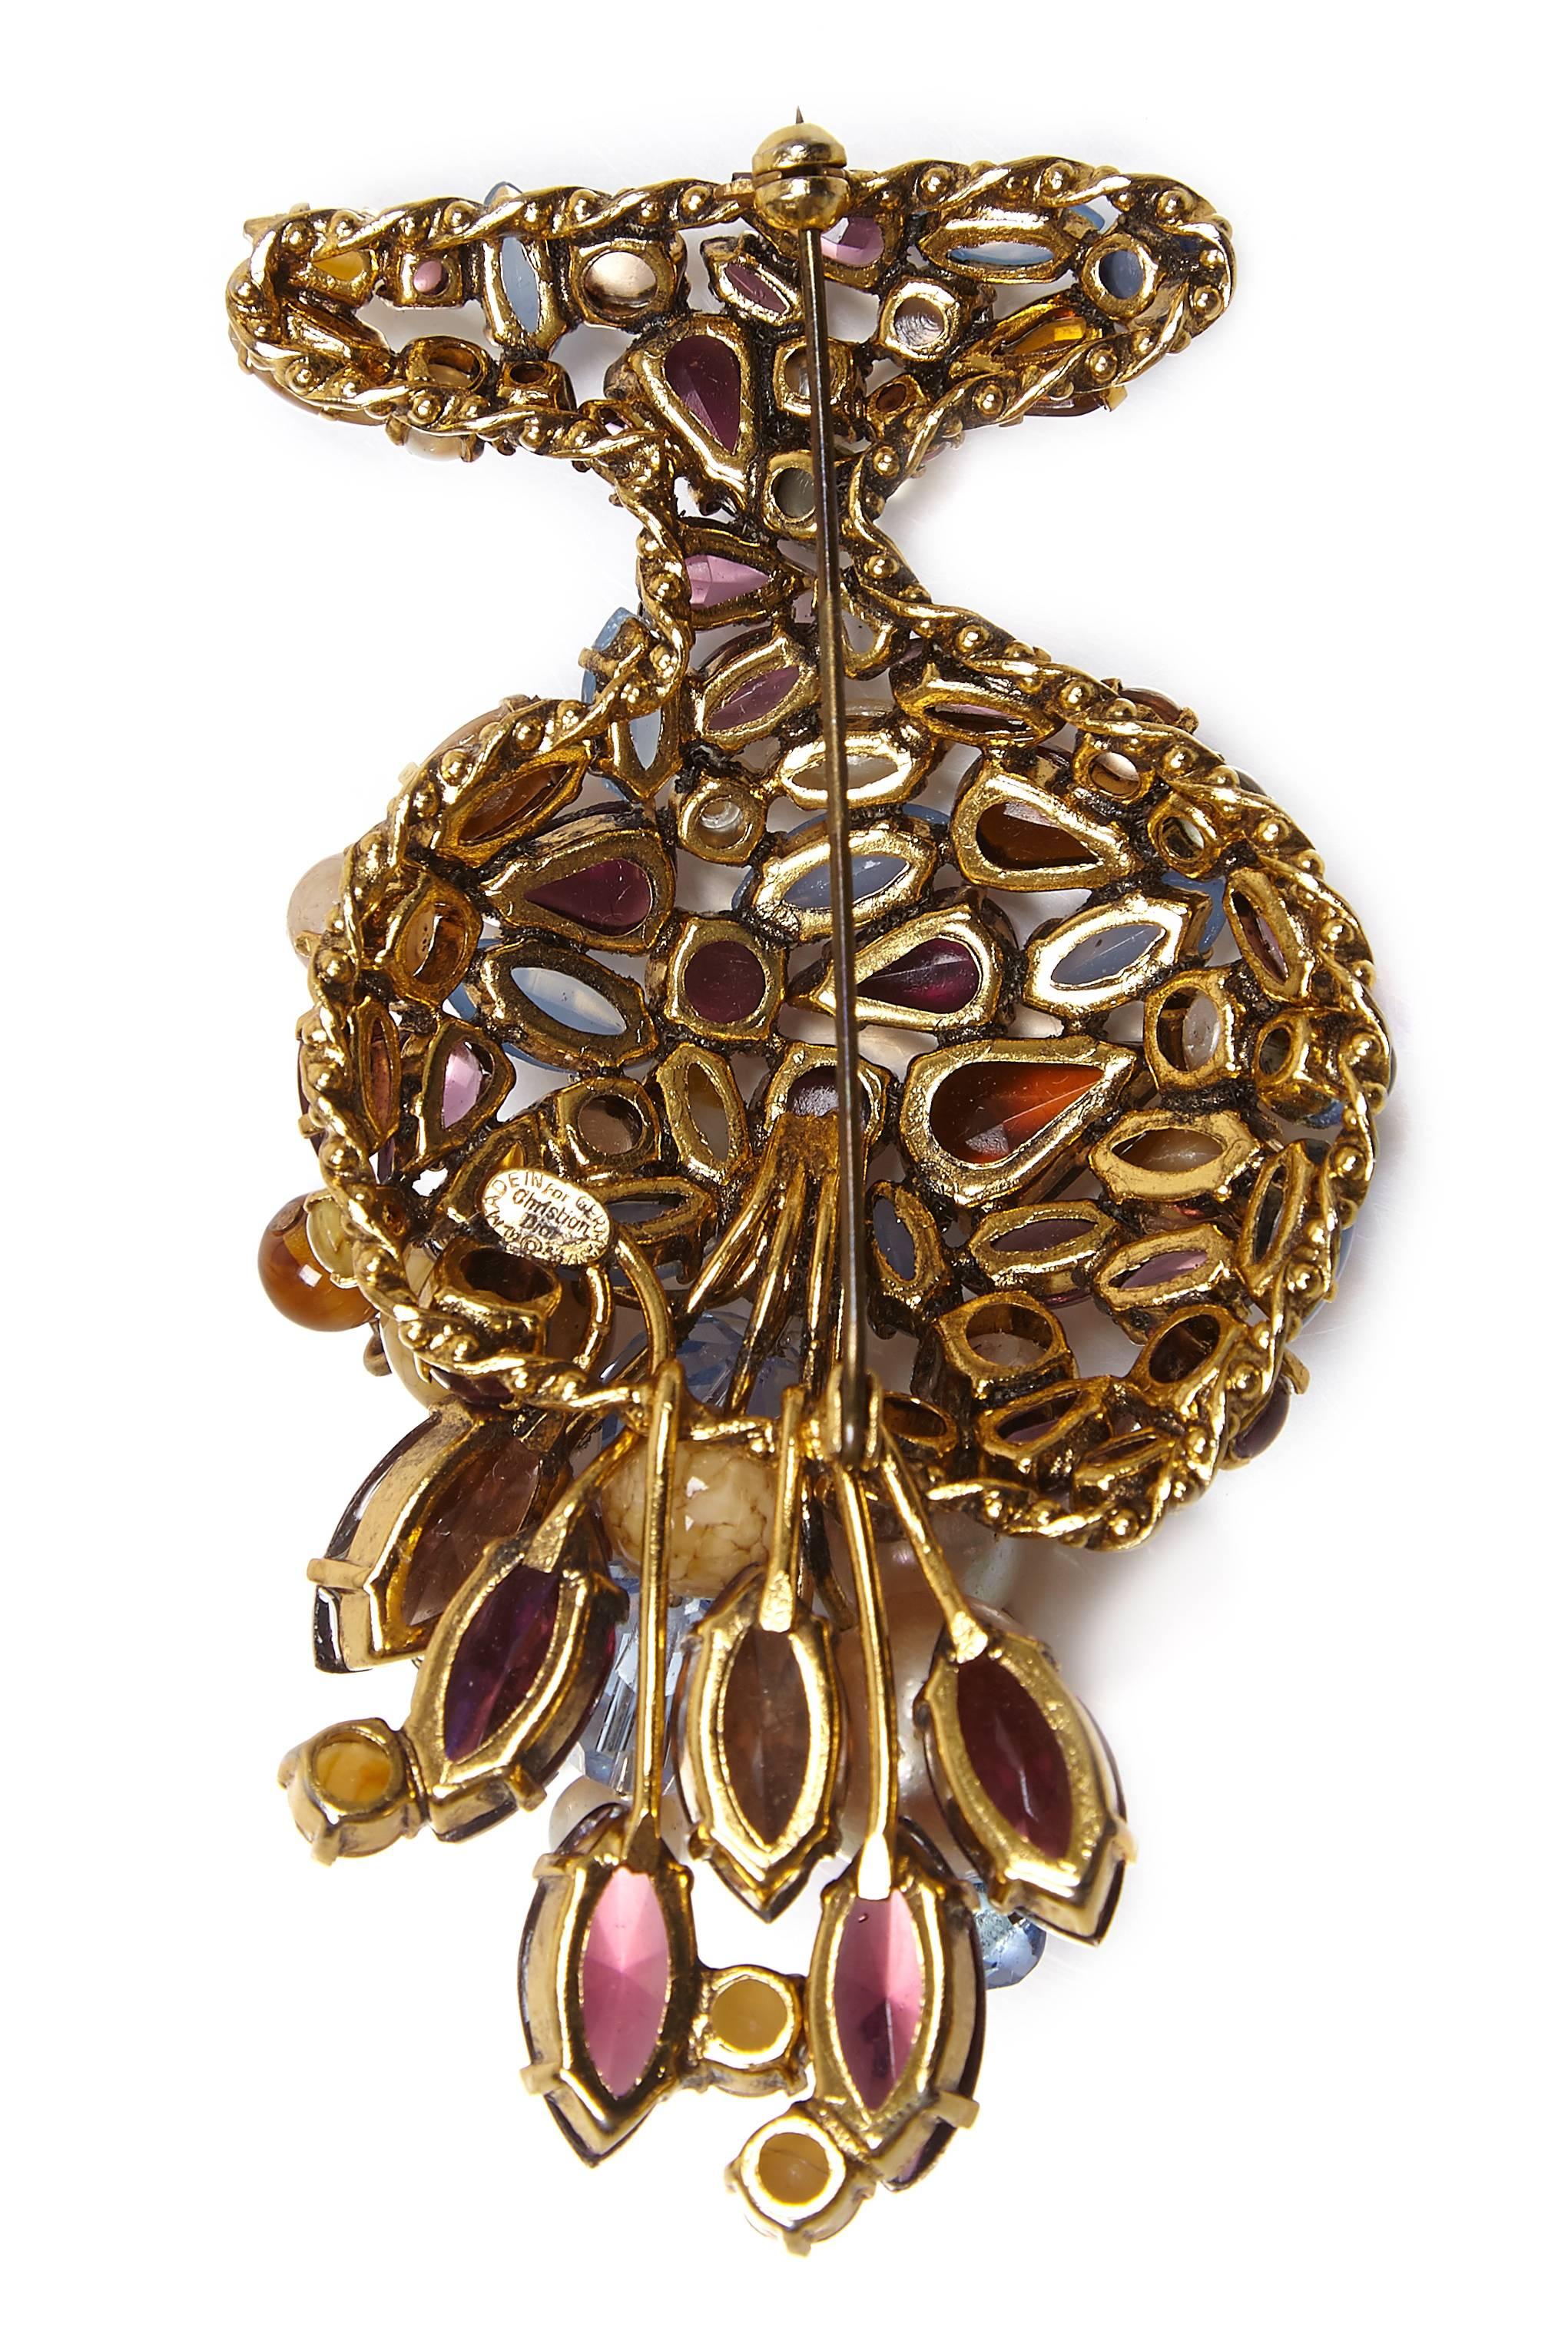 Spectacular 1960s Christian Dior brooch designed by Henkel & Grosse circa 1960.  Abstract design so can be worn a number of variations with prong-set glass stones in deep amber, purple and blue; set with several glass pearls and in gold coloured